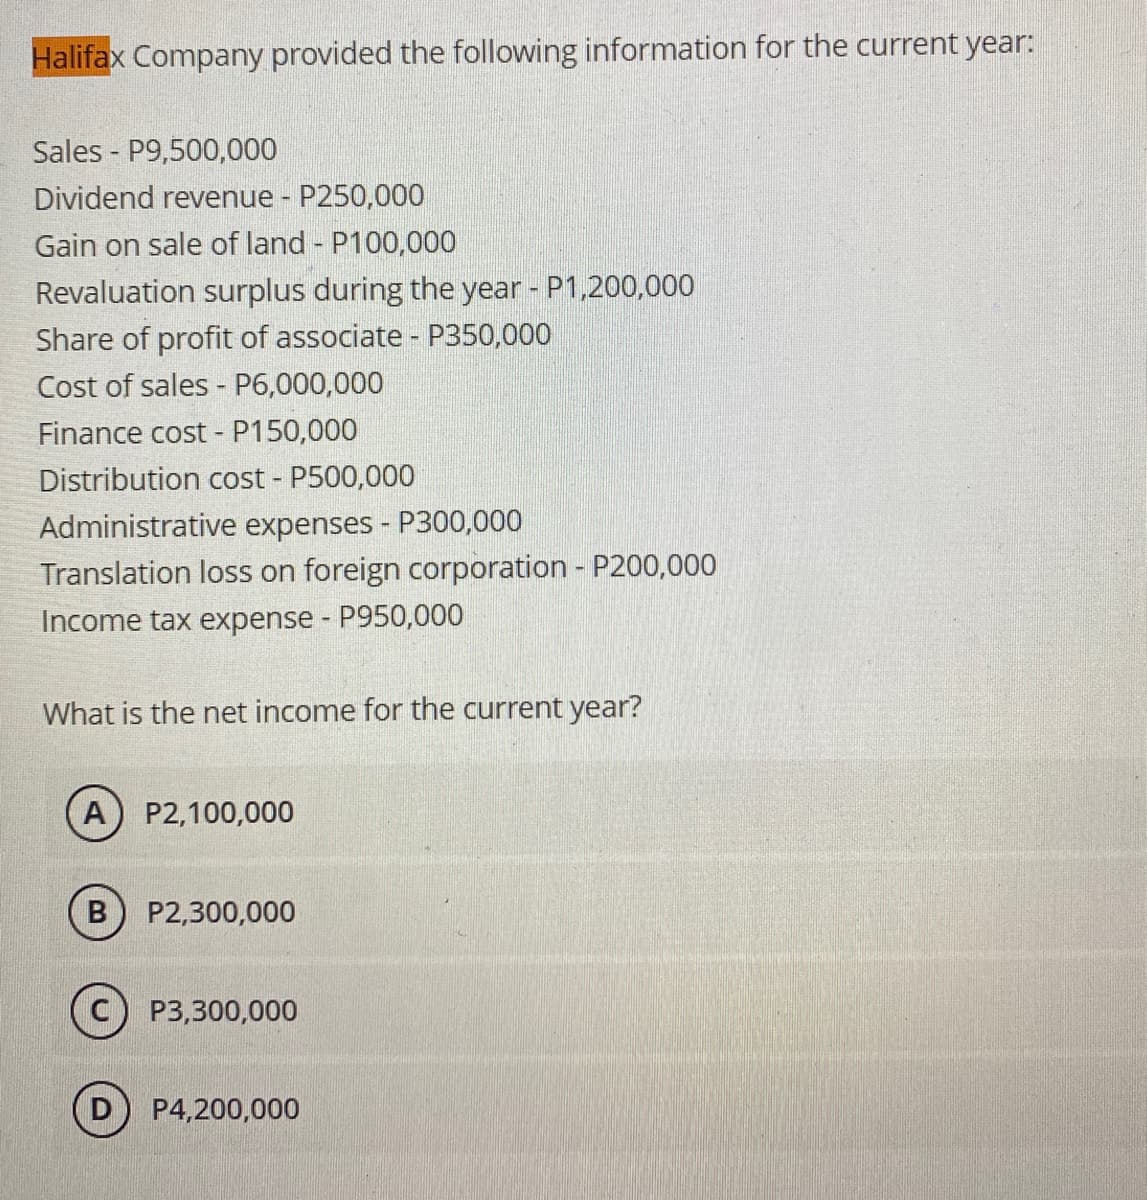 Halifax Company provided the following information for the current year:
Sales P9,500,000
Dividend revenue - P250,000
Gain on sale of land - P100,000
Revaluation surplus during the year - P1,200,000
Share of profit of associate - P350,000
Cost of sales - P6,000,000
Finance cost-P150,000
Distribution cost - P500,000
Administrative expenses - P300,000
Translation loss on foreign corporation - P200,000
Income tax expense - P950,000
What is the net income for the current year?
A) P2,100,000
B P2,300,000
P3,300,000
P4,200,000